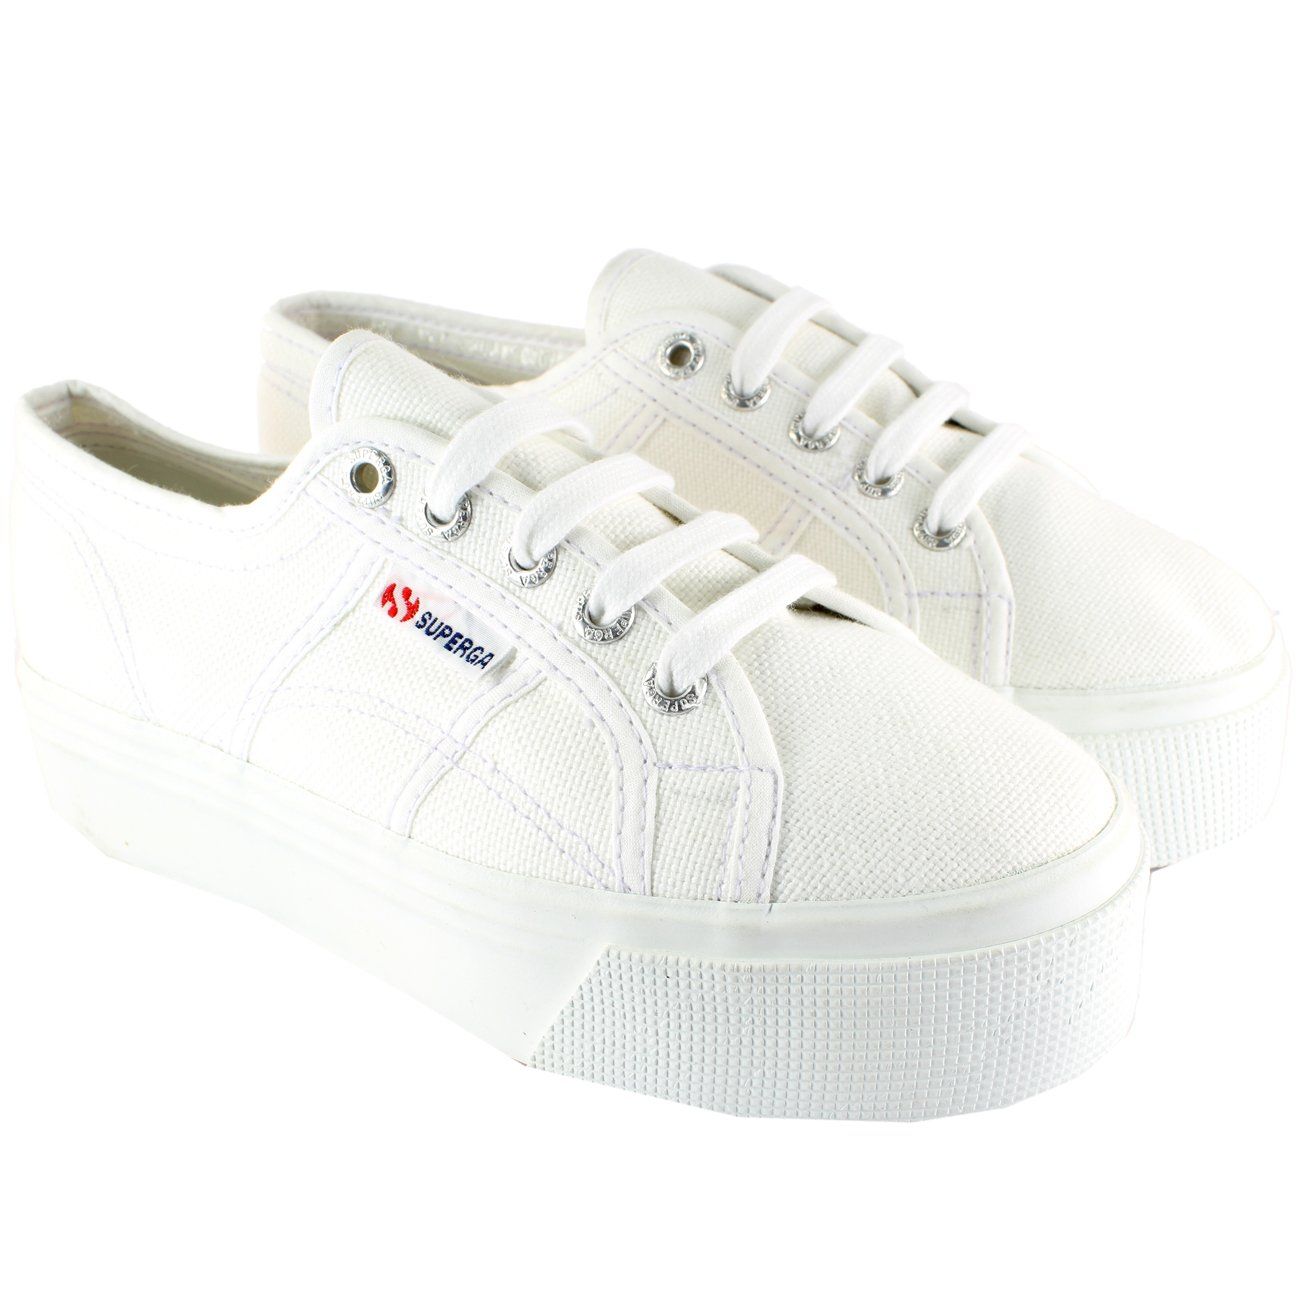 Luxury Platform Sneakers: Double Wheel Nylon Gabardine, Canvas, High Top,  Casual Style, Small White Size Ideal For Fashionable Men And Women From  Kuzmashoes, $49.75 | DHgate.Com